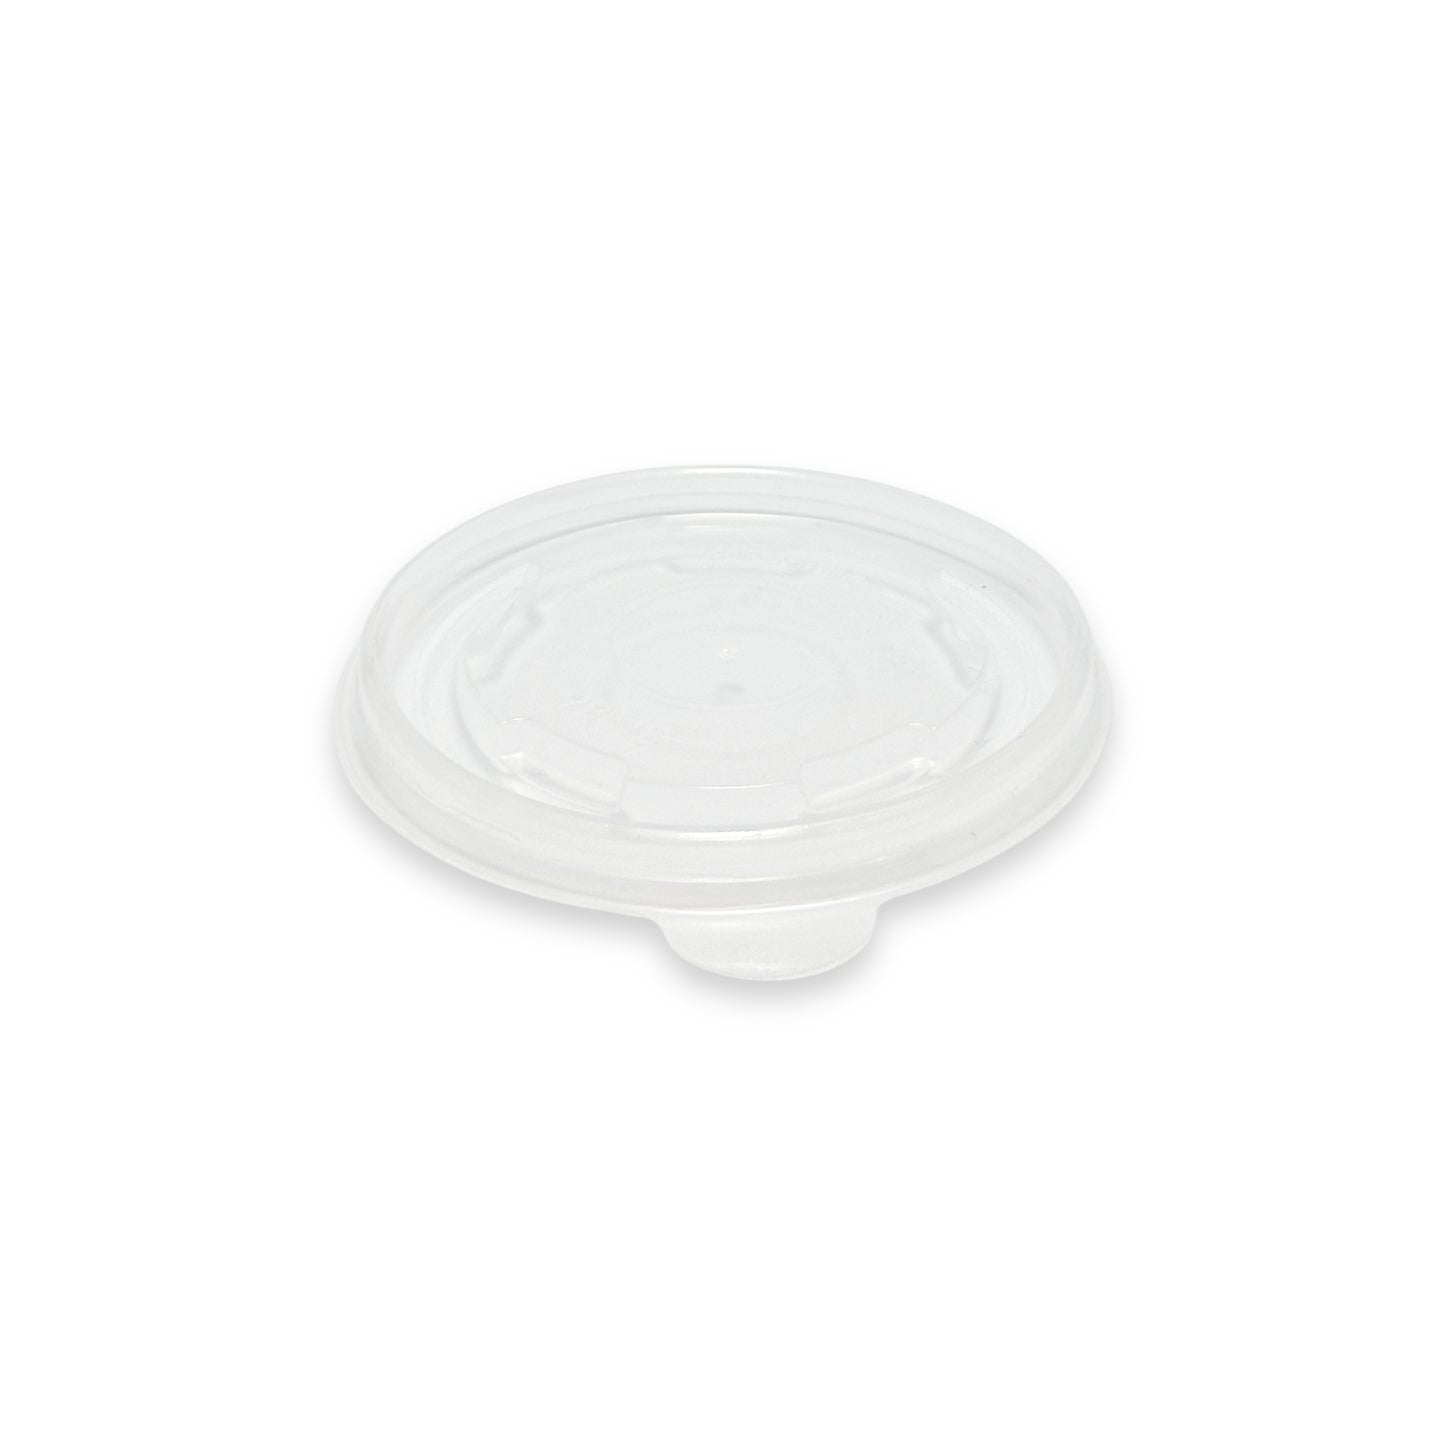 KIS-SL86G | 86mm PP Lid for 5oz Paper Soup Container; From $0.037/pc